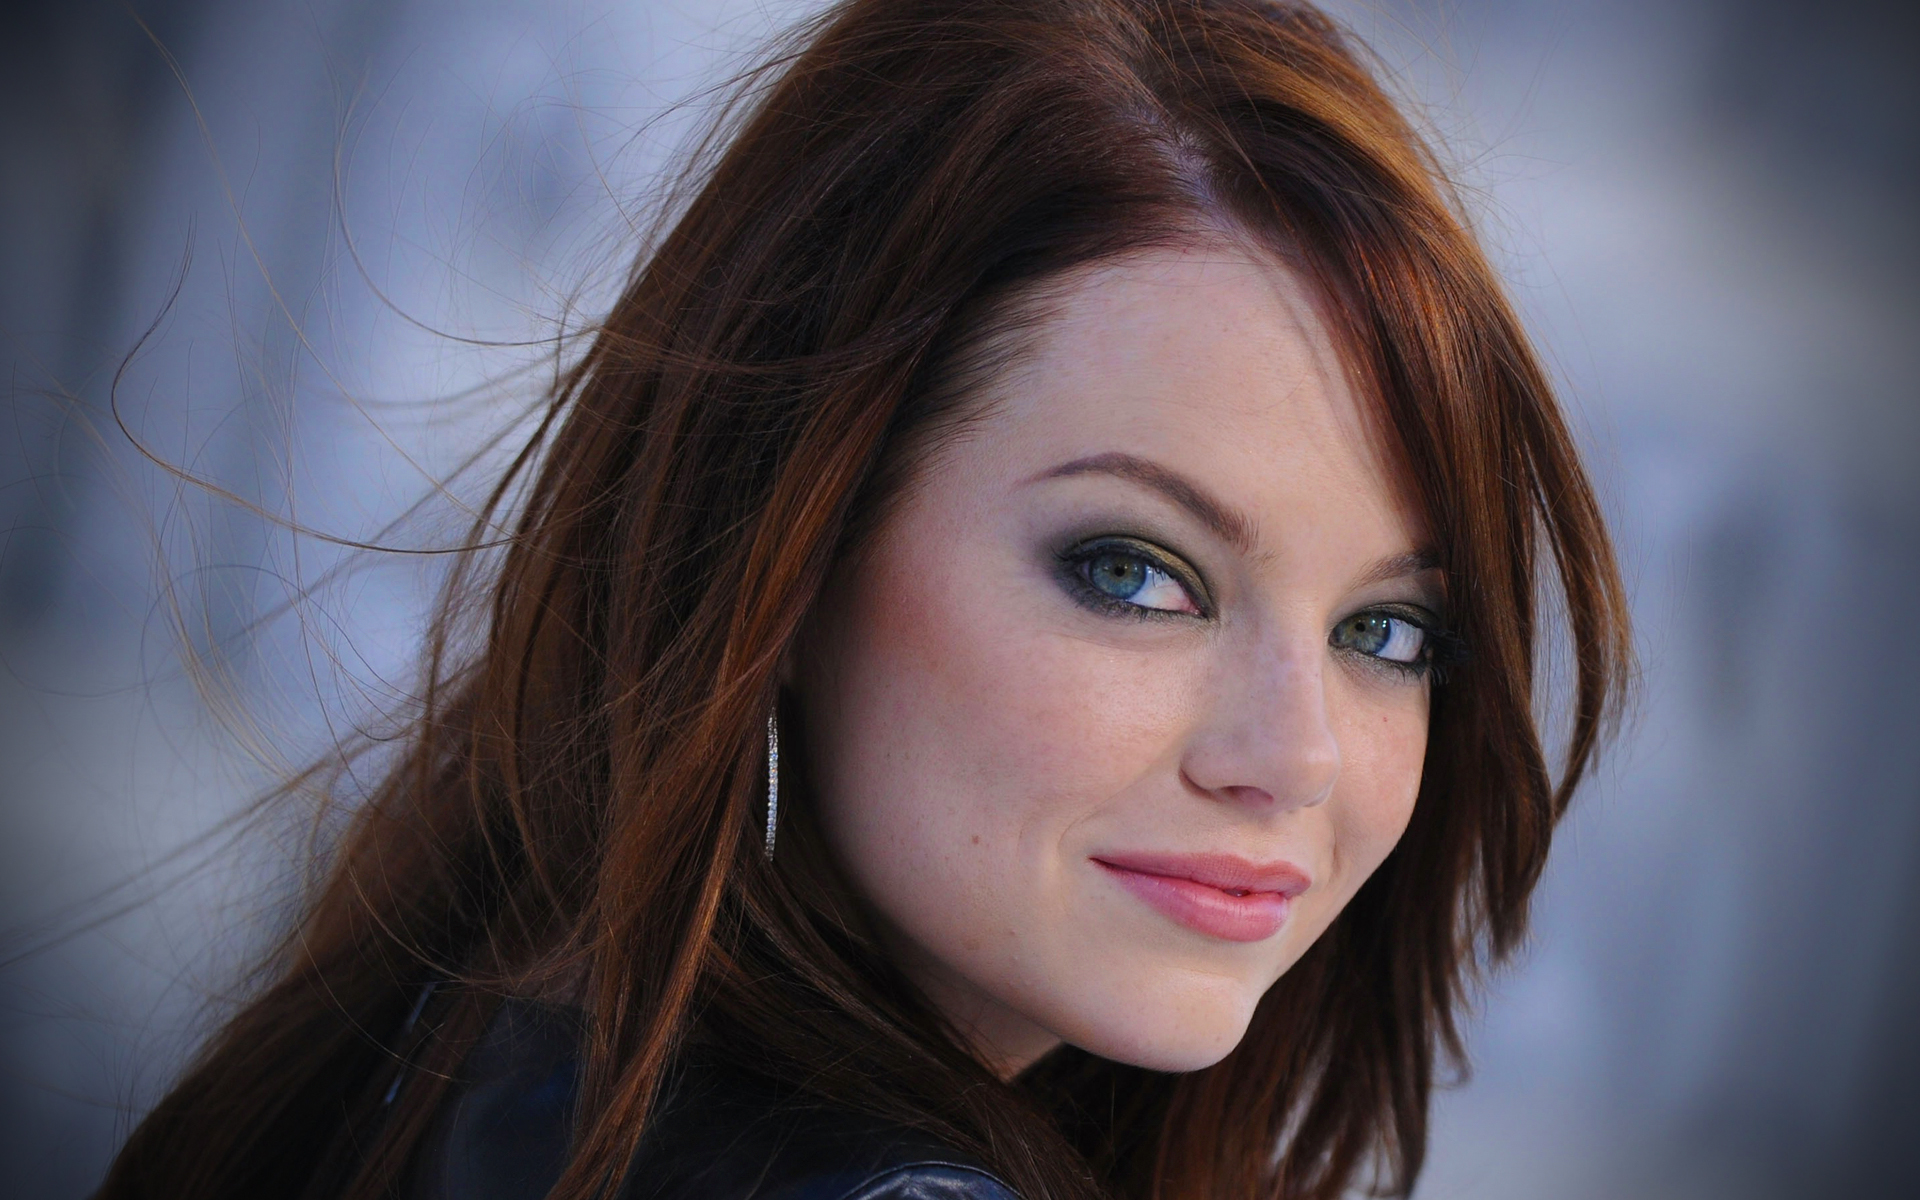 overview roles and movies of actress Emma Stone